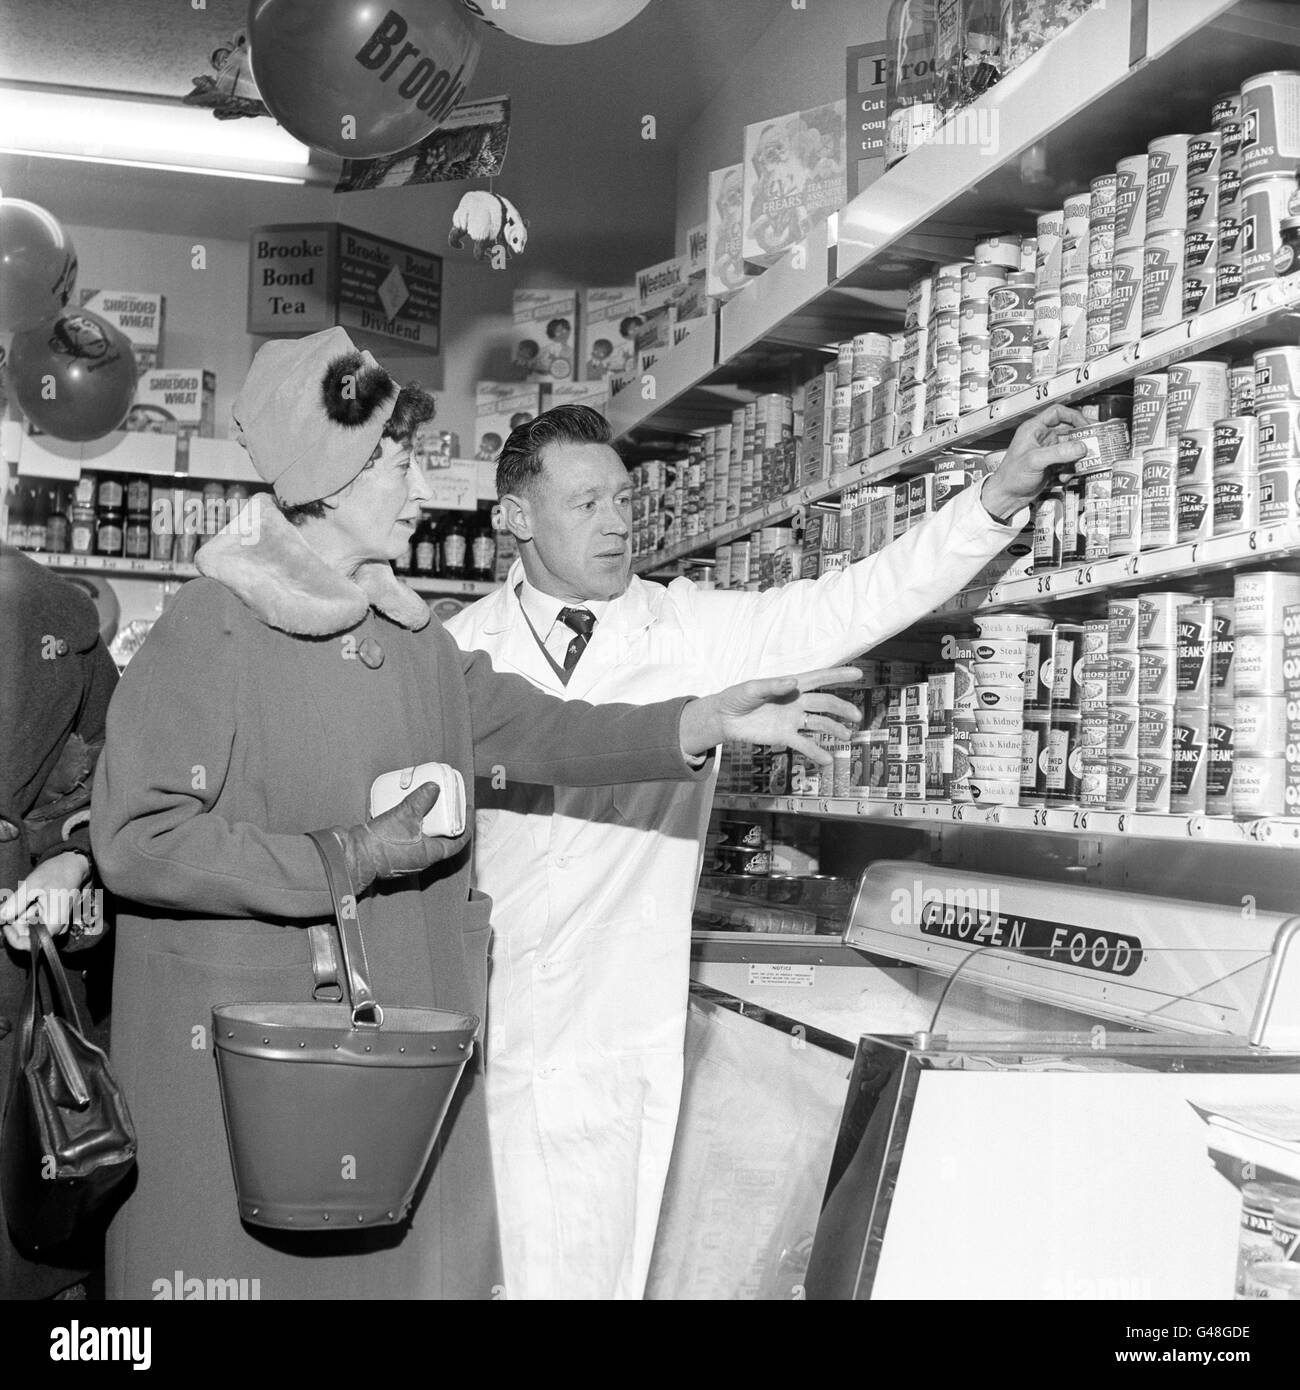 Soccer - League Division One - Nottingham Forest - Billy Gray's Shop - Nottingham. Billy Gray, captain of Nottingham Forest, who also runs his own grocery business and off-licence in Wollaton Road, Nottingham. Stock Photo